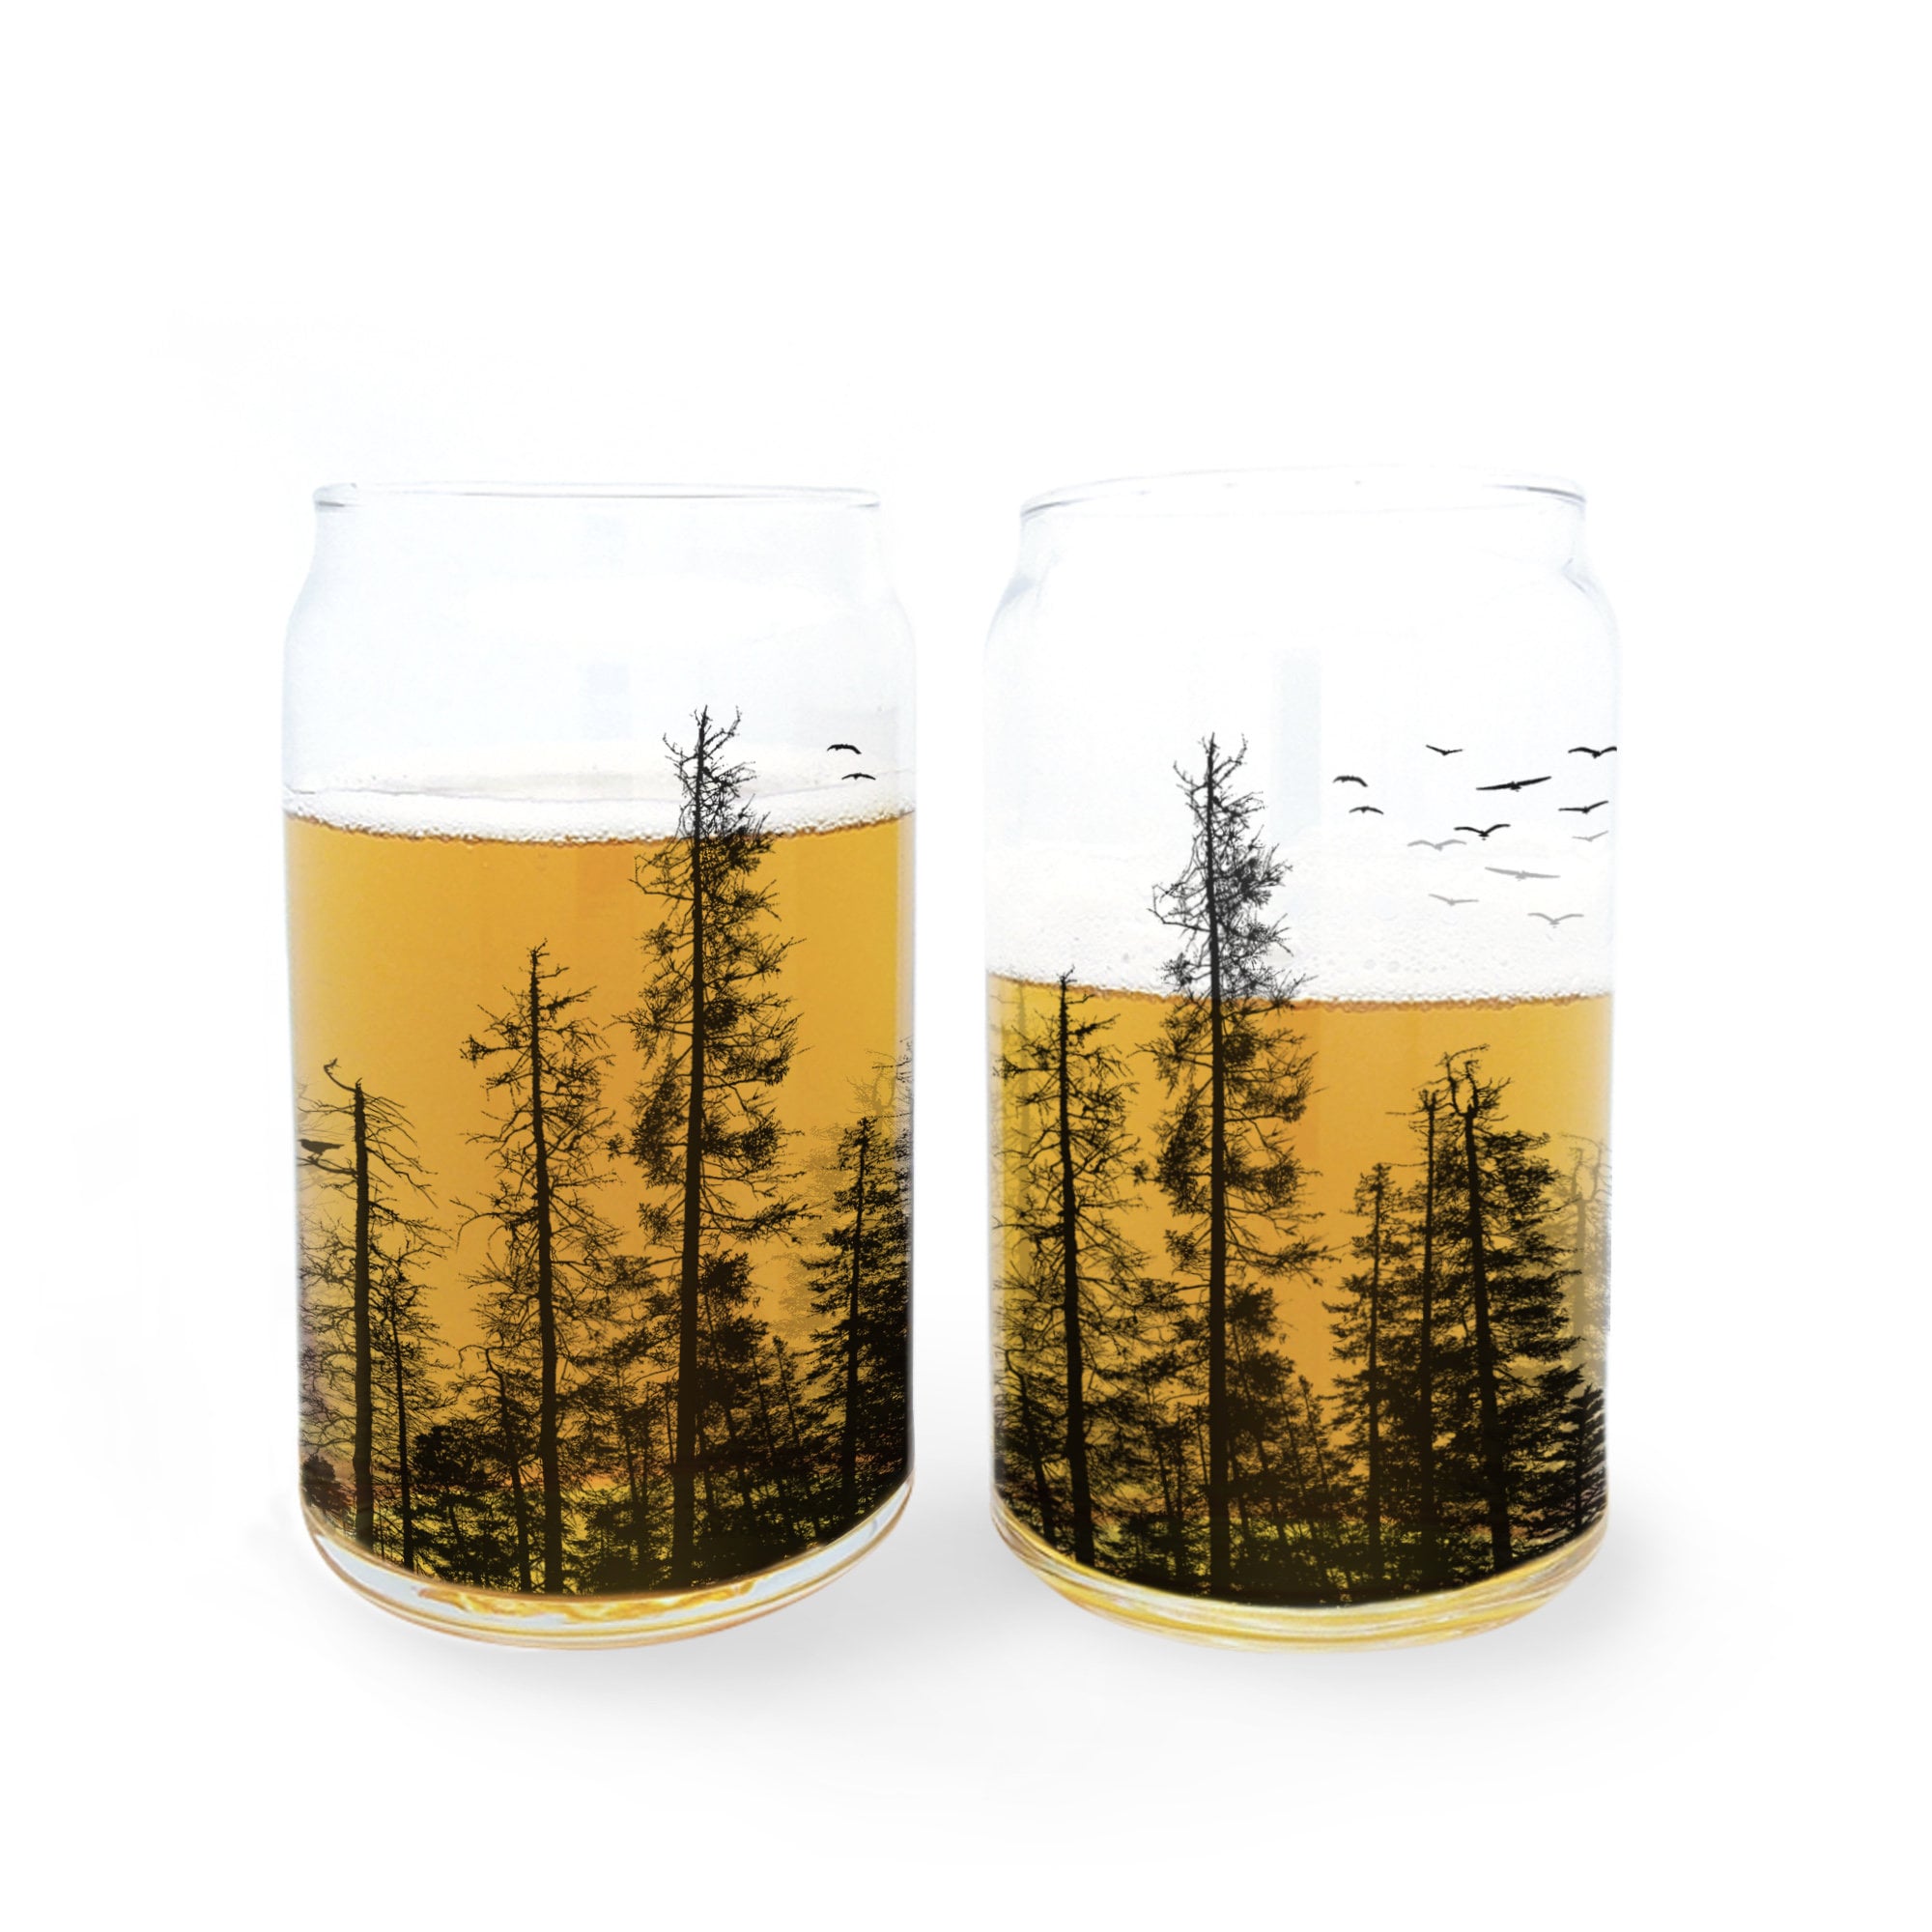 Brewing America Muffin Top Nucleated Beer Glasses - Pint Glass  - Cider, Soda, Craft Beer Gifts (Clear) (Single): Beer Glasses